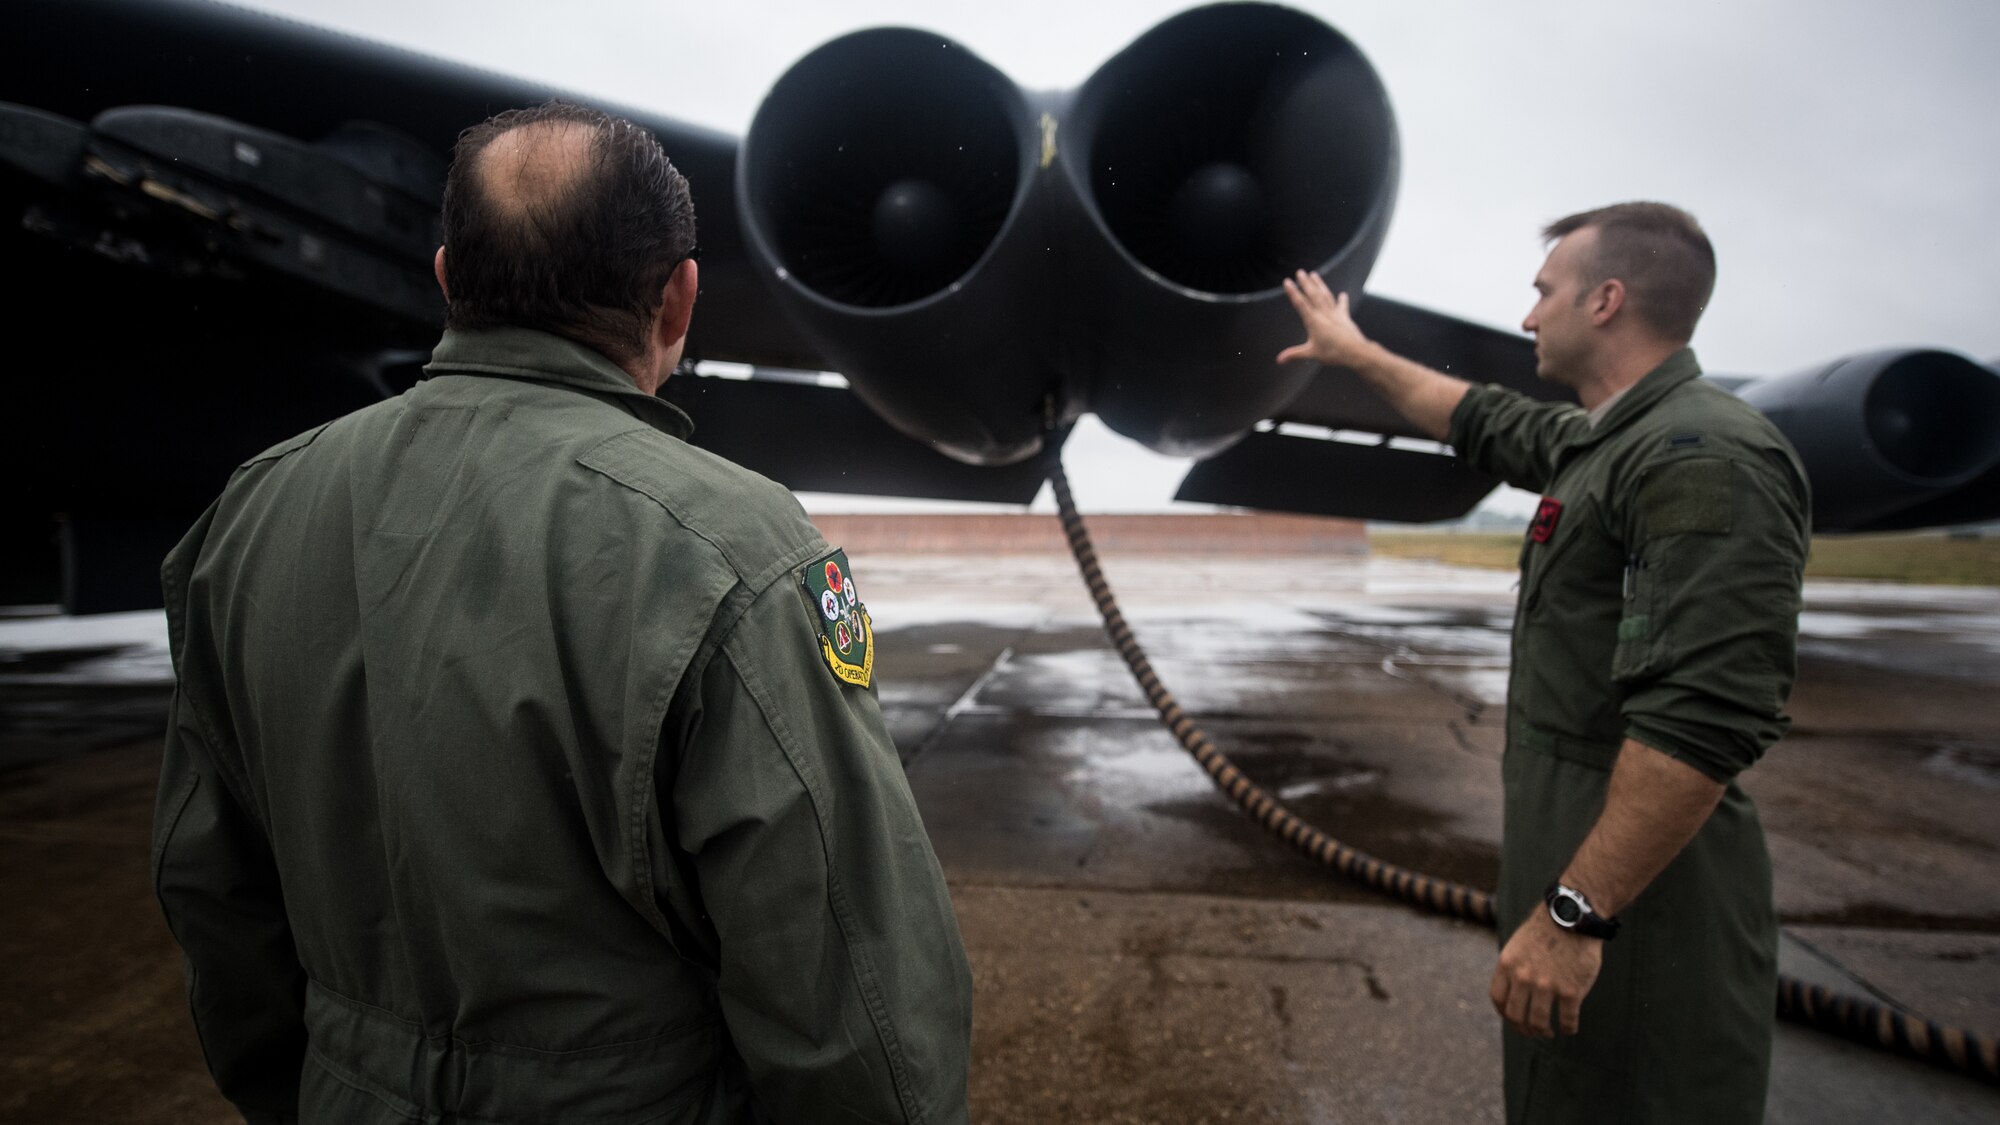 Mike McSwain, 2nd Operations Group honorary commander, is briefed by aircrew before an honorary commander’s unit orientation flight at Barksdale Air Force Base, La., June 20, 2018. McSwain toured the B-52 Stratofortress familiarizing himself with different parts of the aircraft and its purposes.